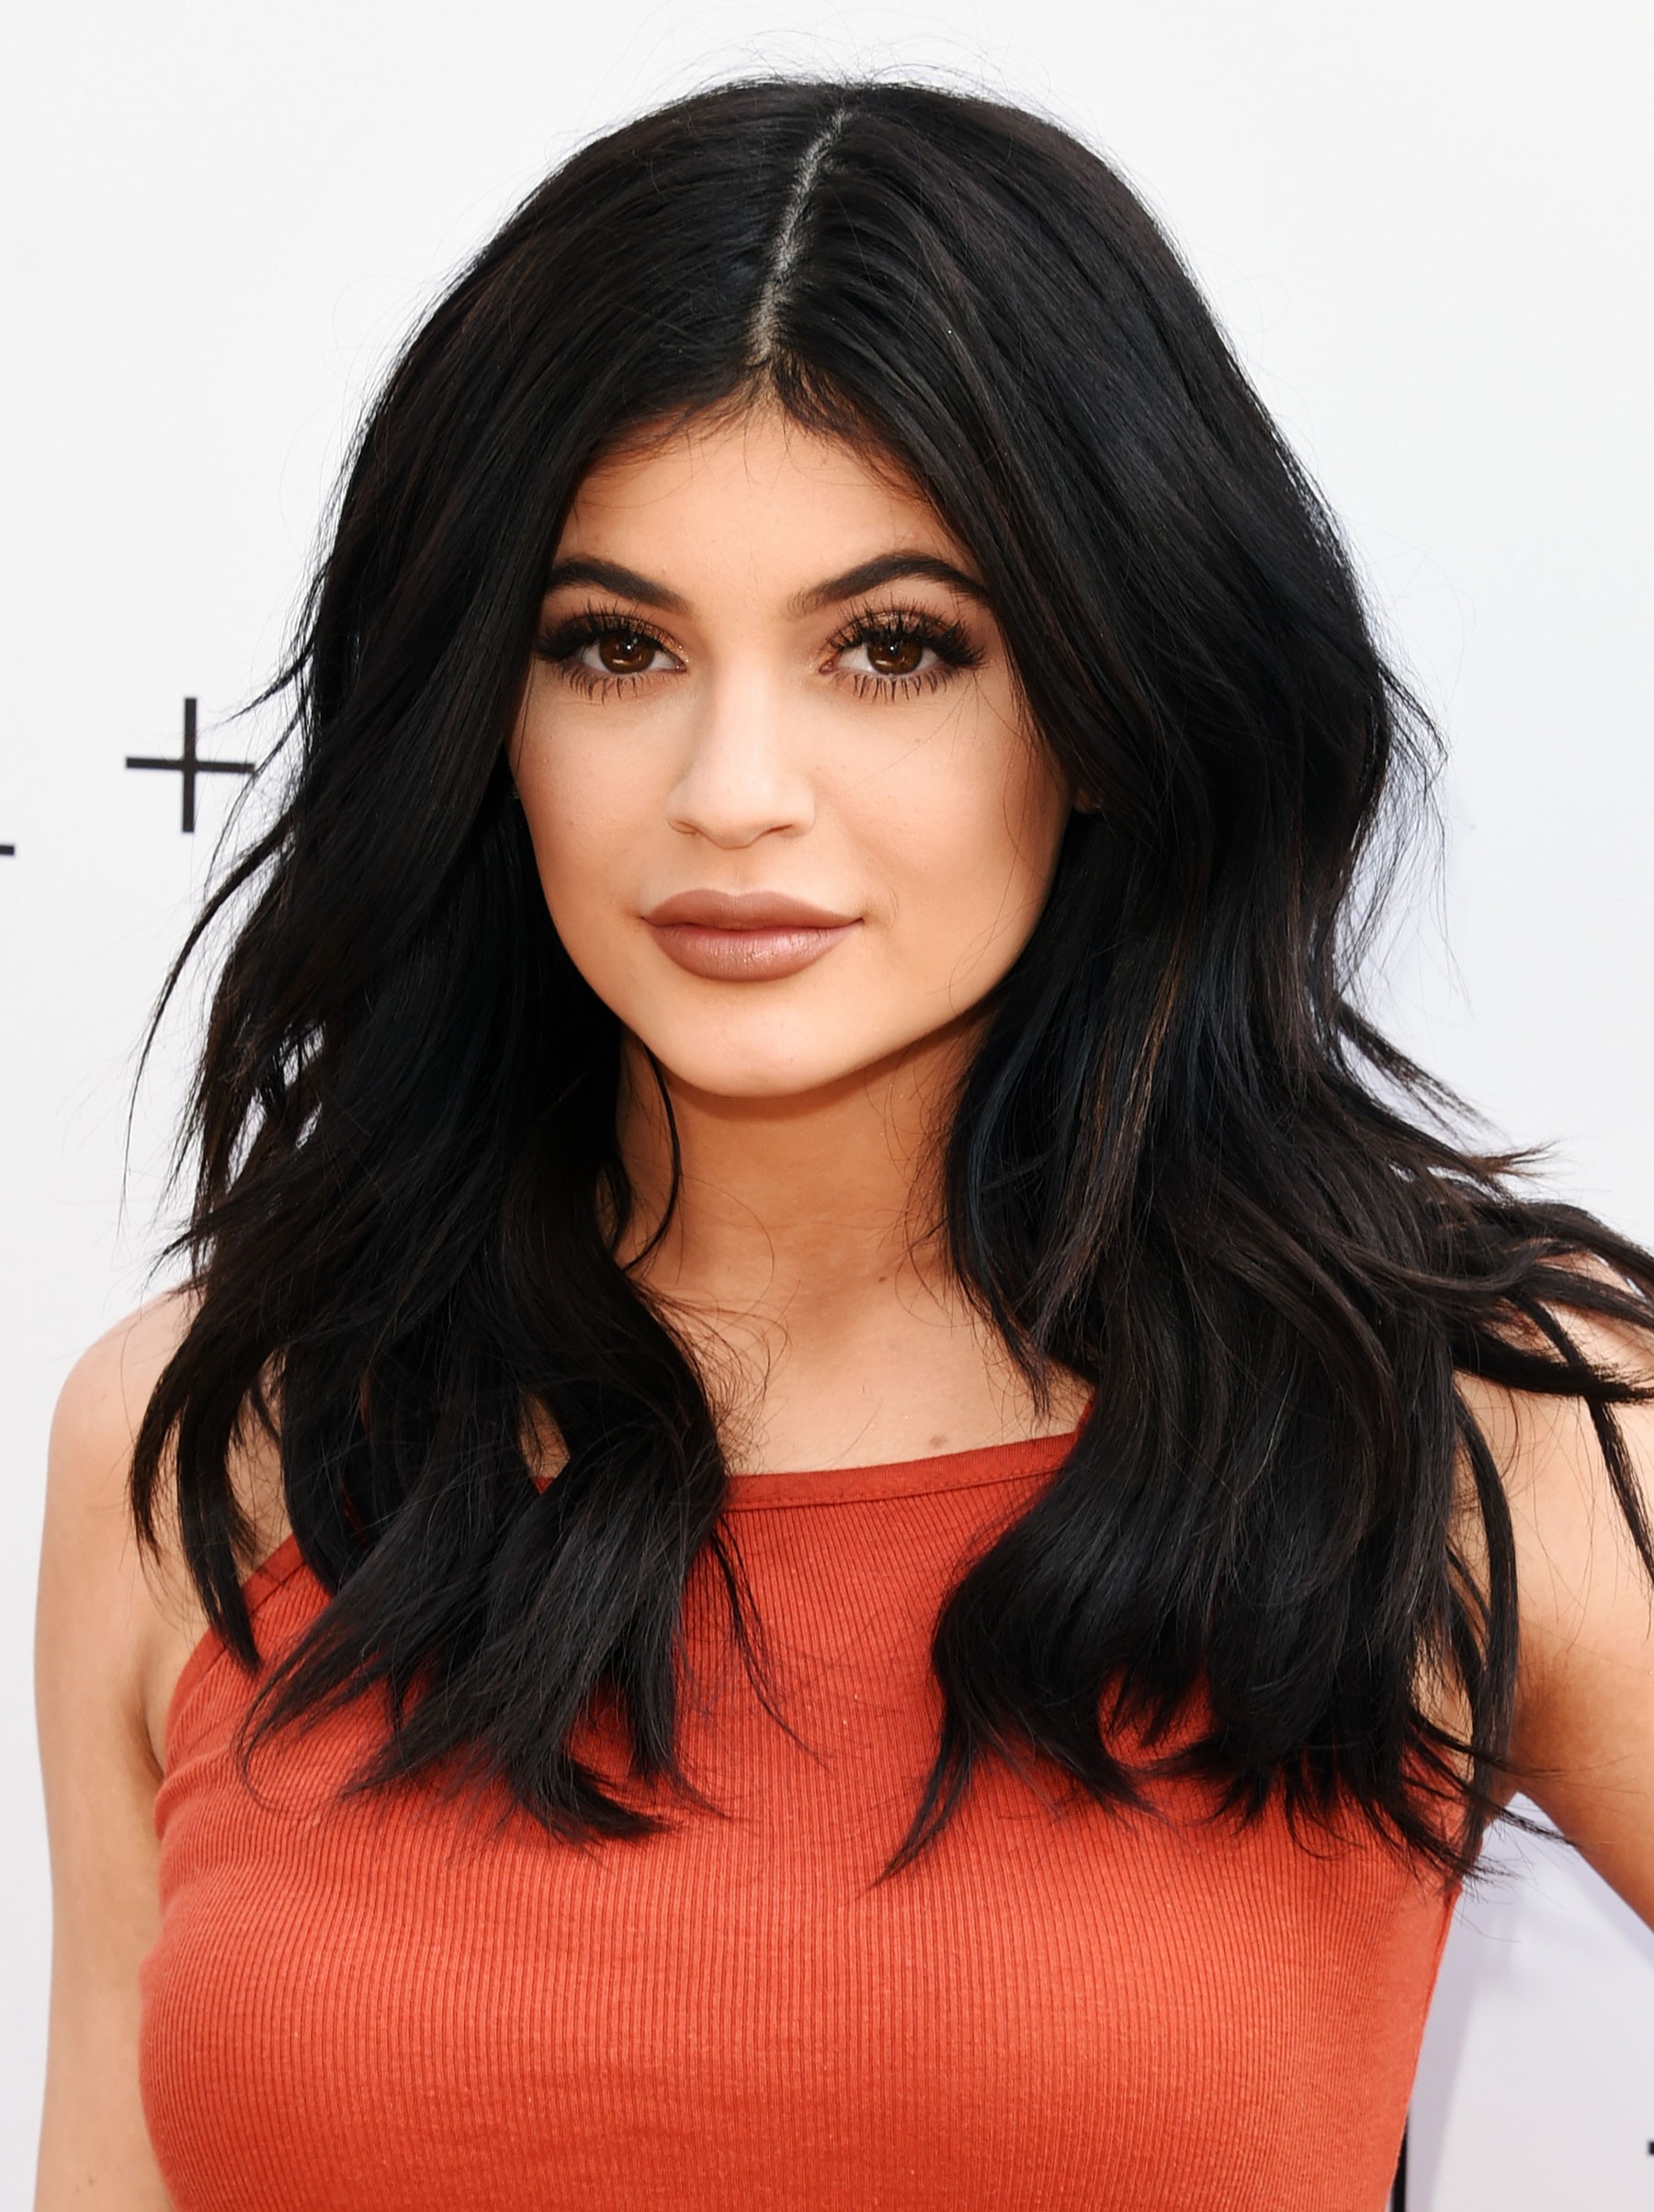 Kylie Jenner - 33,703,166 seguidores (Foto: Getty Images)